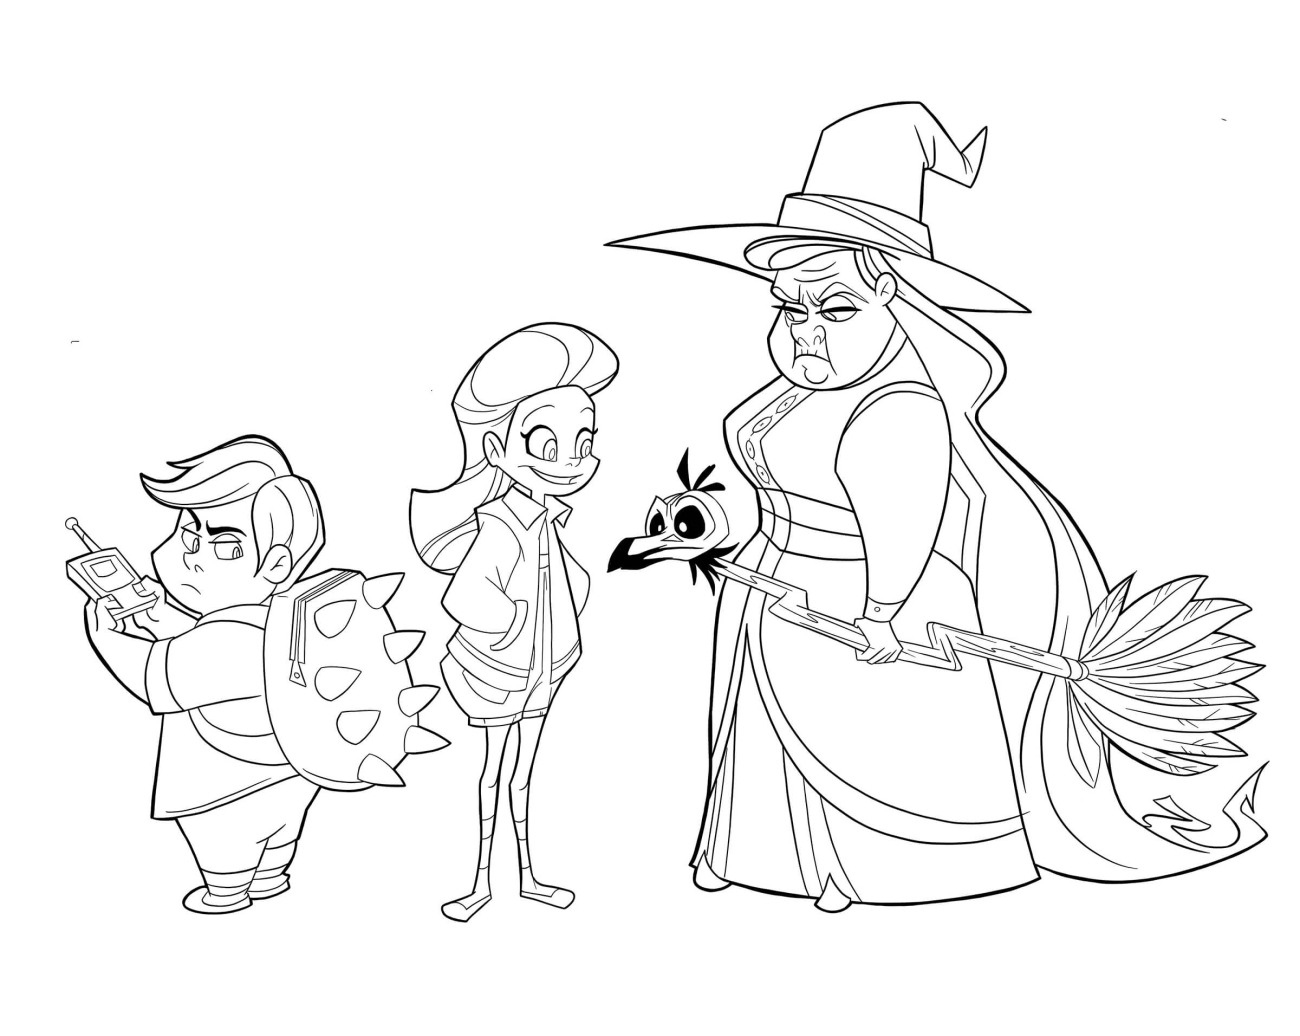 A digital drawing of a cartoonish witch and two children